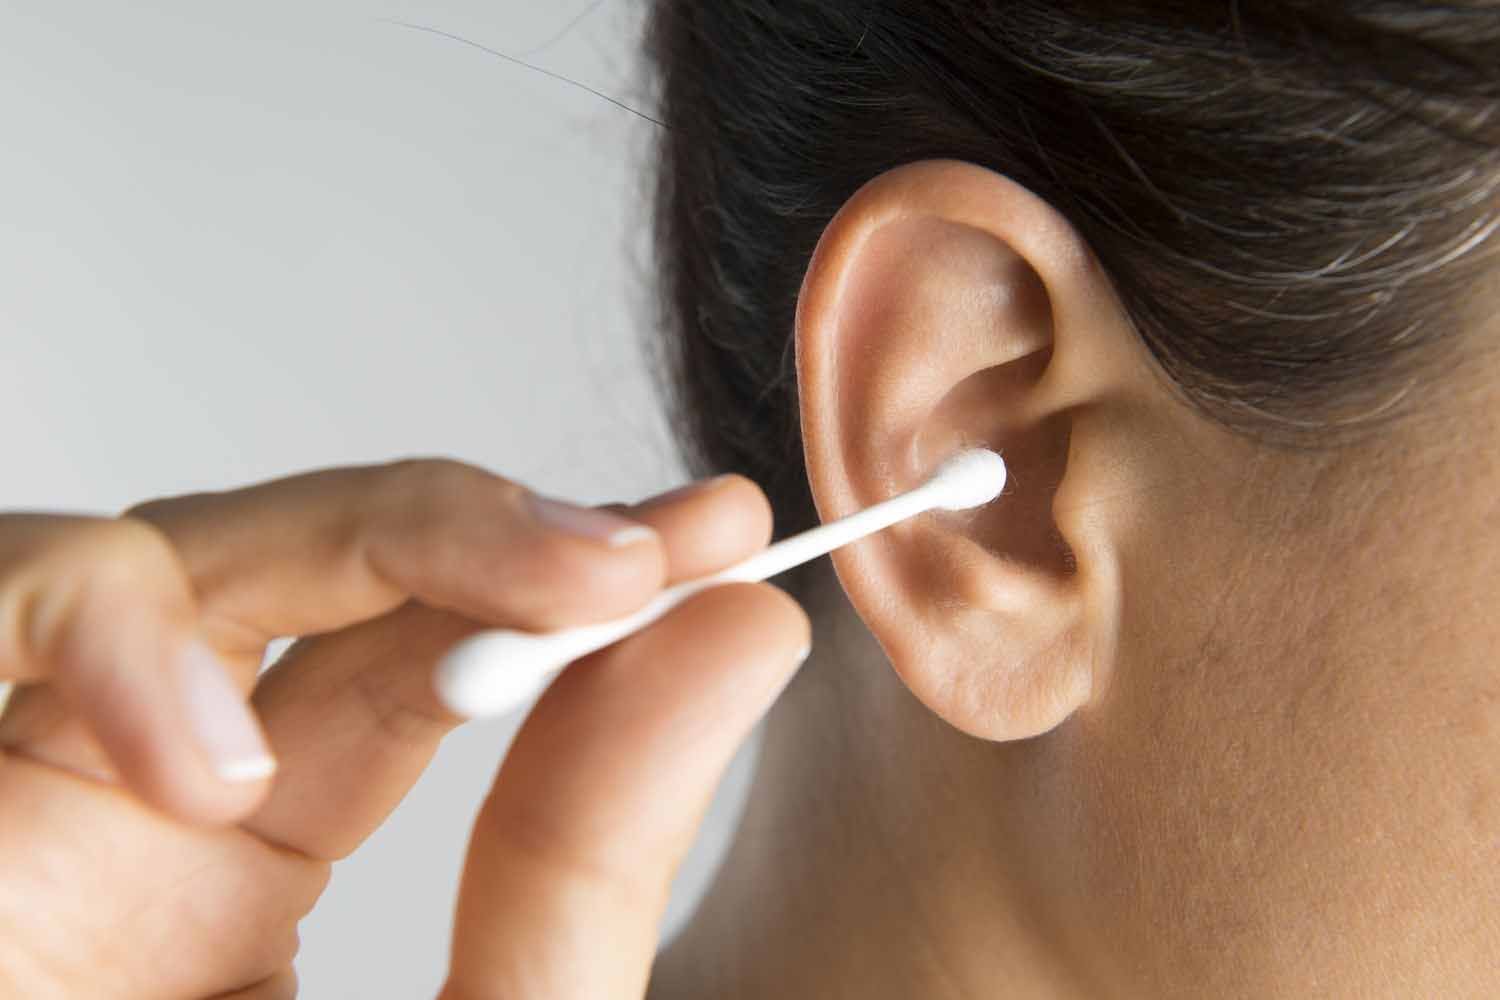 Ear Wax Clean - Ear wax will be cleaned with these methods without harming the ear.